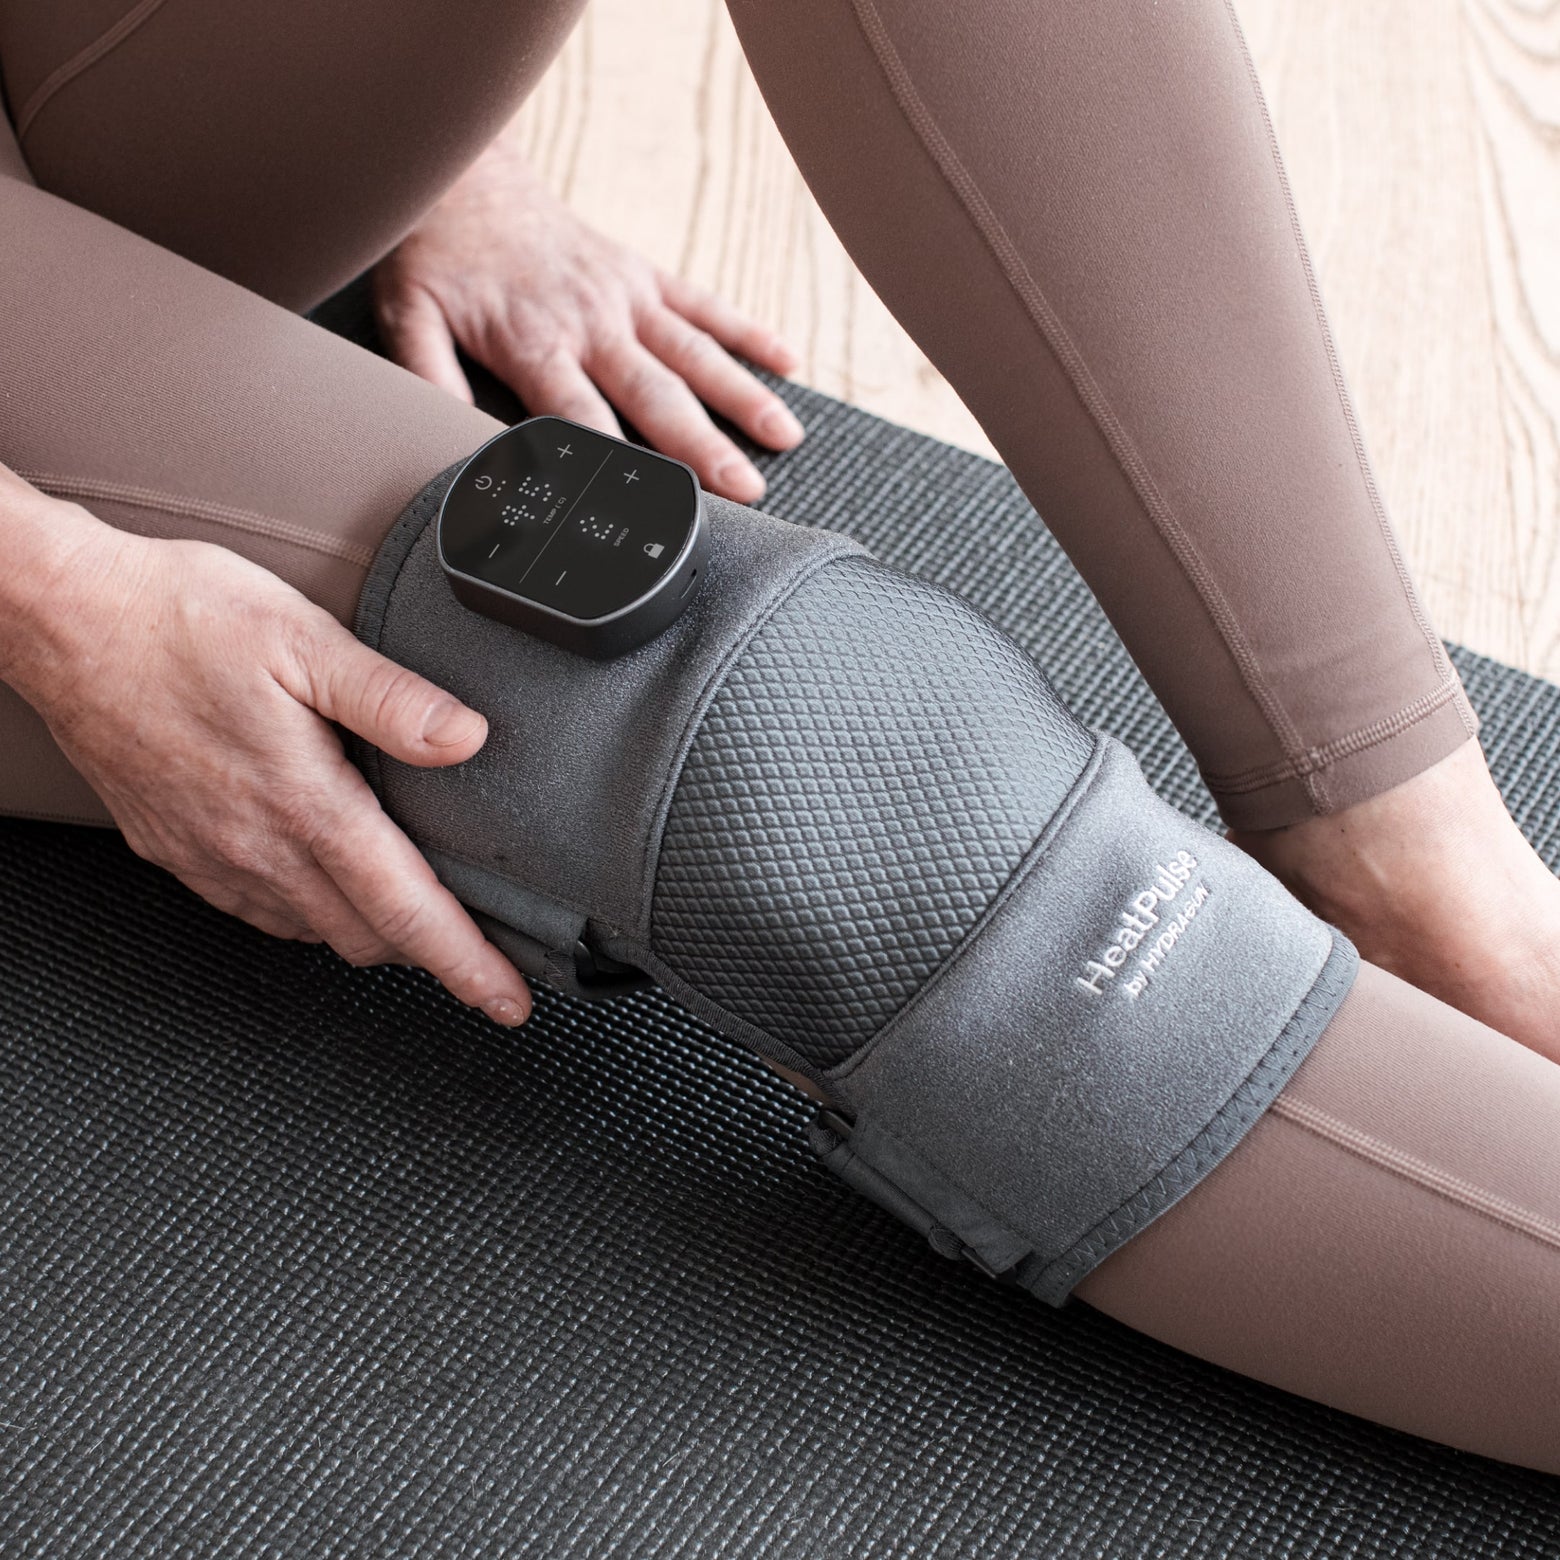  MORELIFE Apollo 4-in-1 Vibration Knee Massager with Infrared  Heat, Elbow and Joint Massager, Relieve Tension, Improve Mobility and  Flexibility, Soothe Knee Pain, Travel Friendly